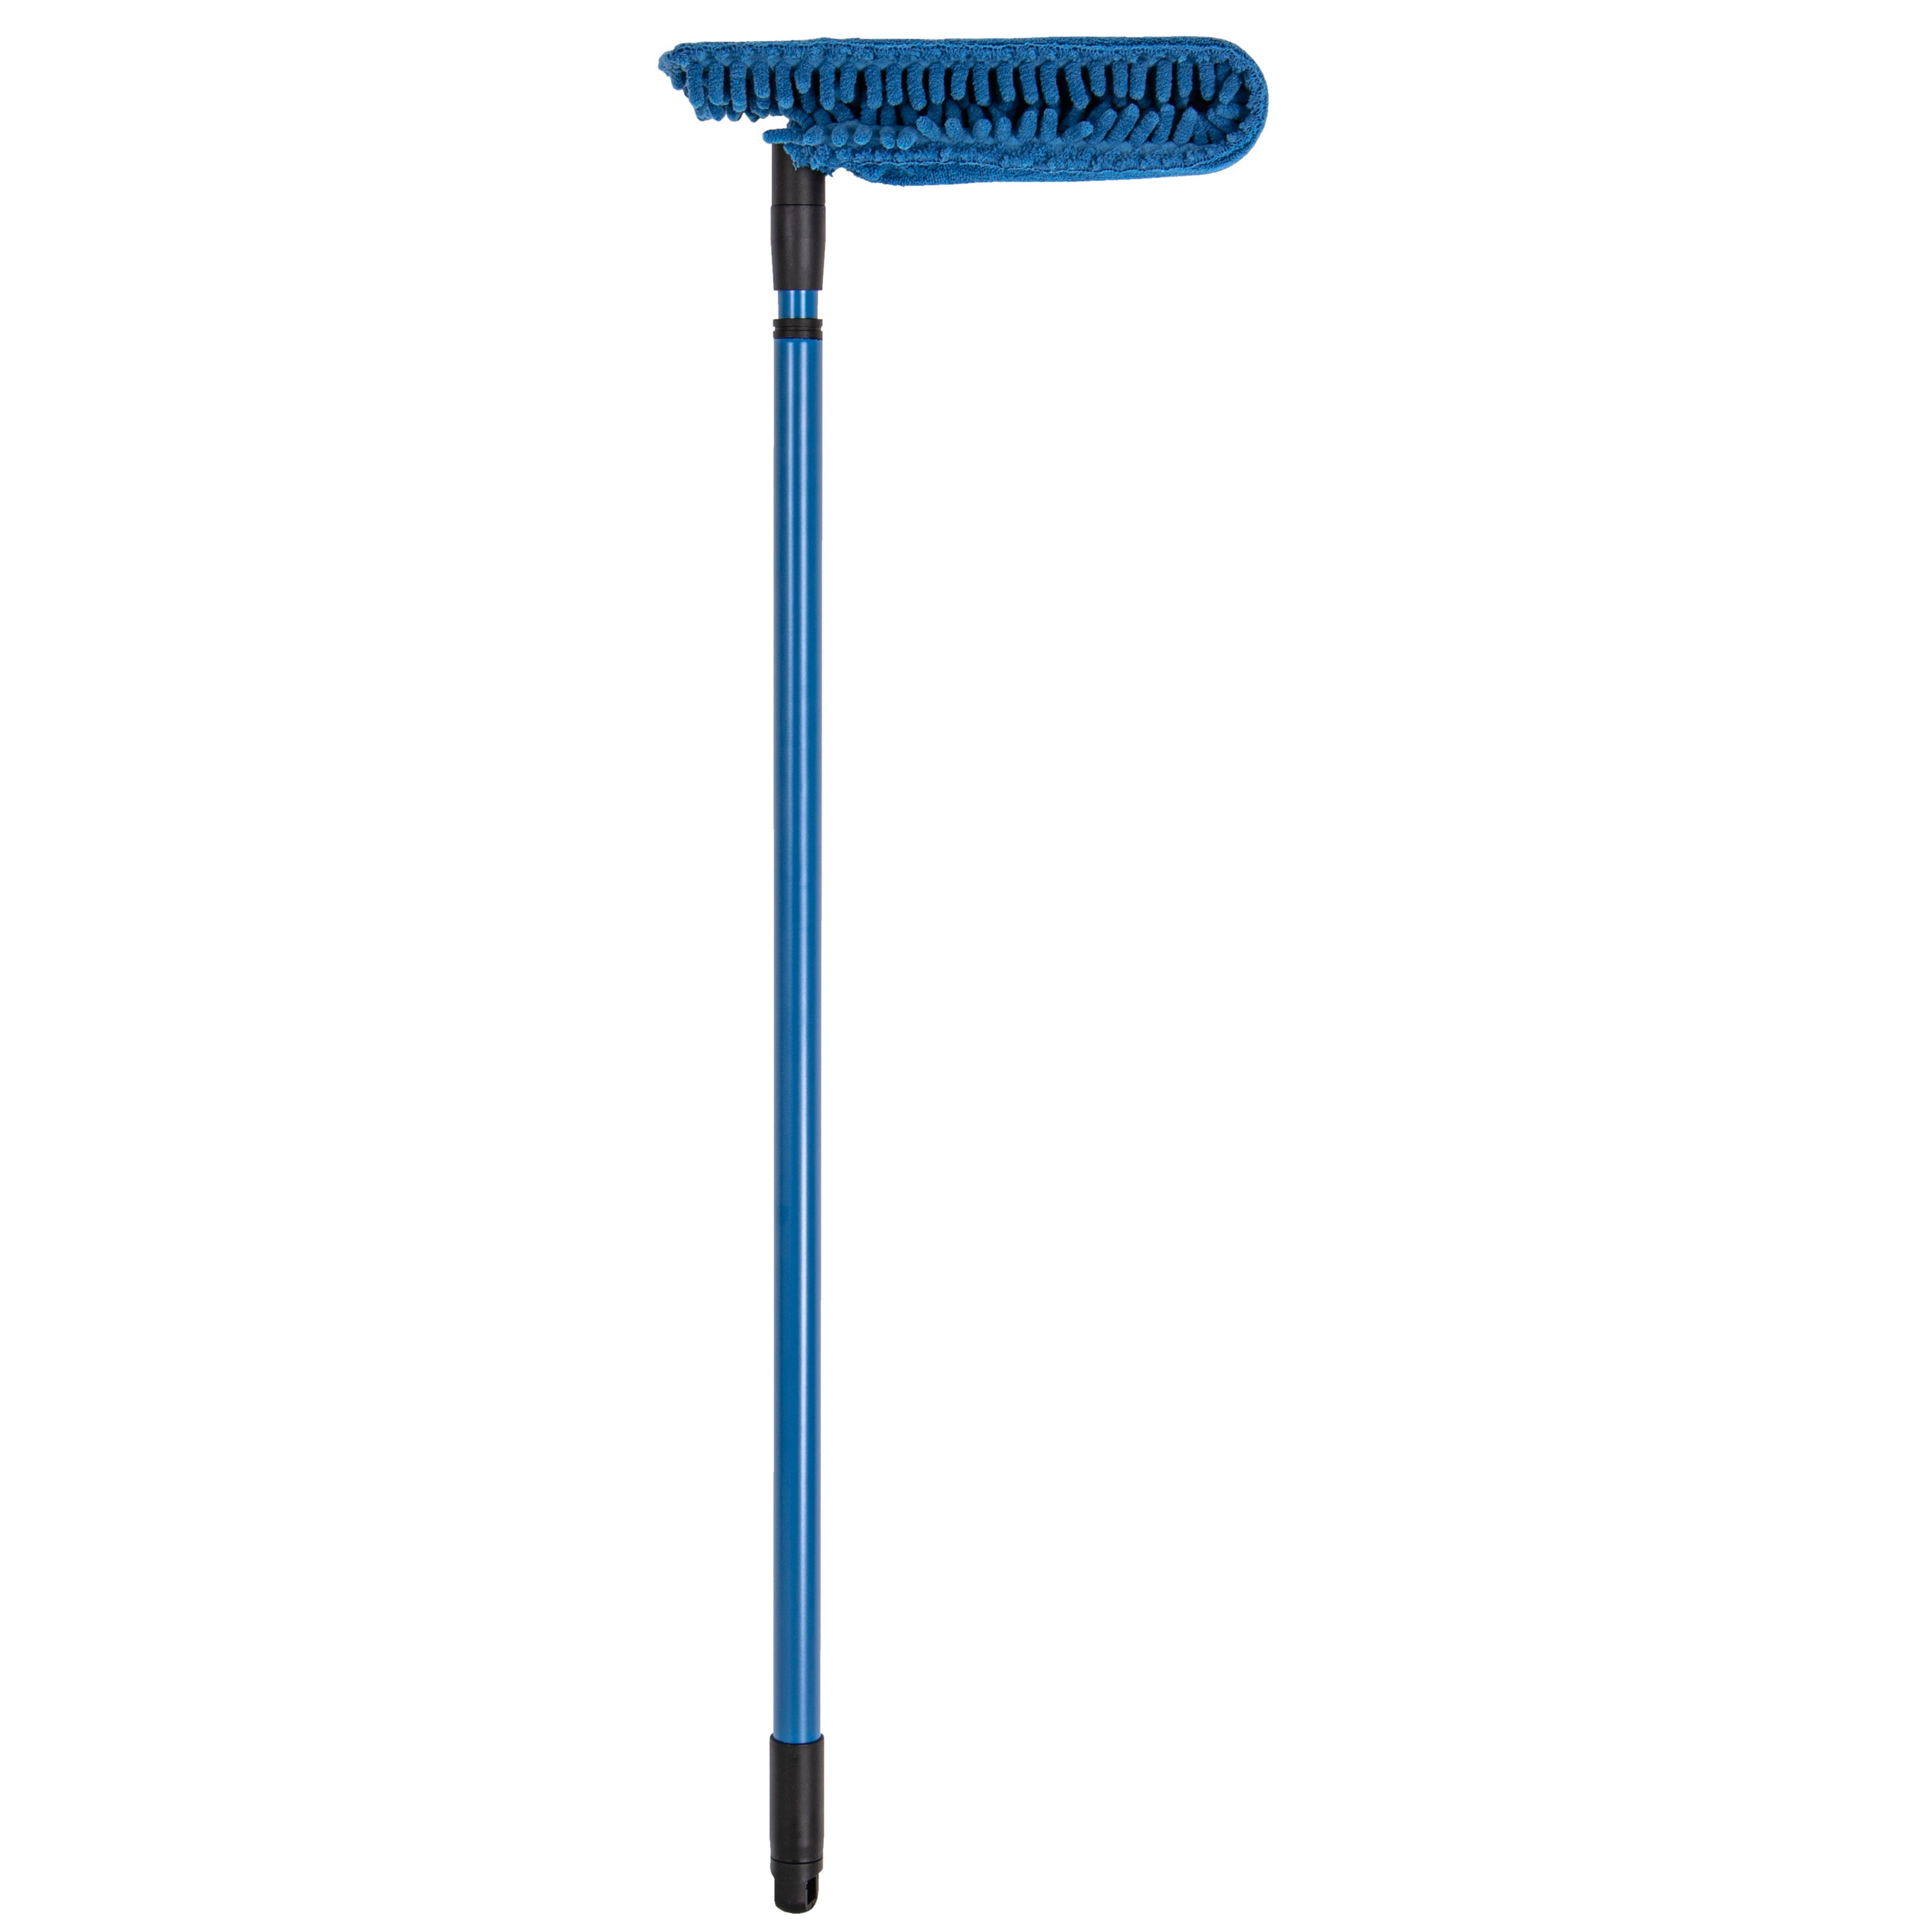 chalowkart Ceiling Fan/Wall/Cobweb/Multi-Purpose Cleaning Brush  (Multicolour) Wet and Dry Duster Price in India - Buy chalowkart Ceiling Fan/Wall/Cobweb/Multi-Purpose  Cleaning Brush (Multicolour) Wet and Dry Duster online at